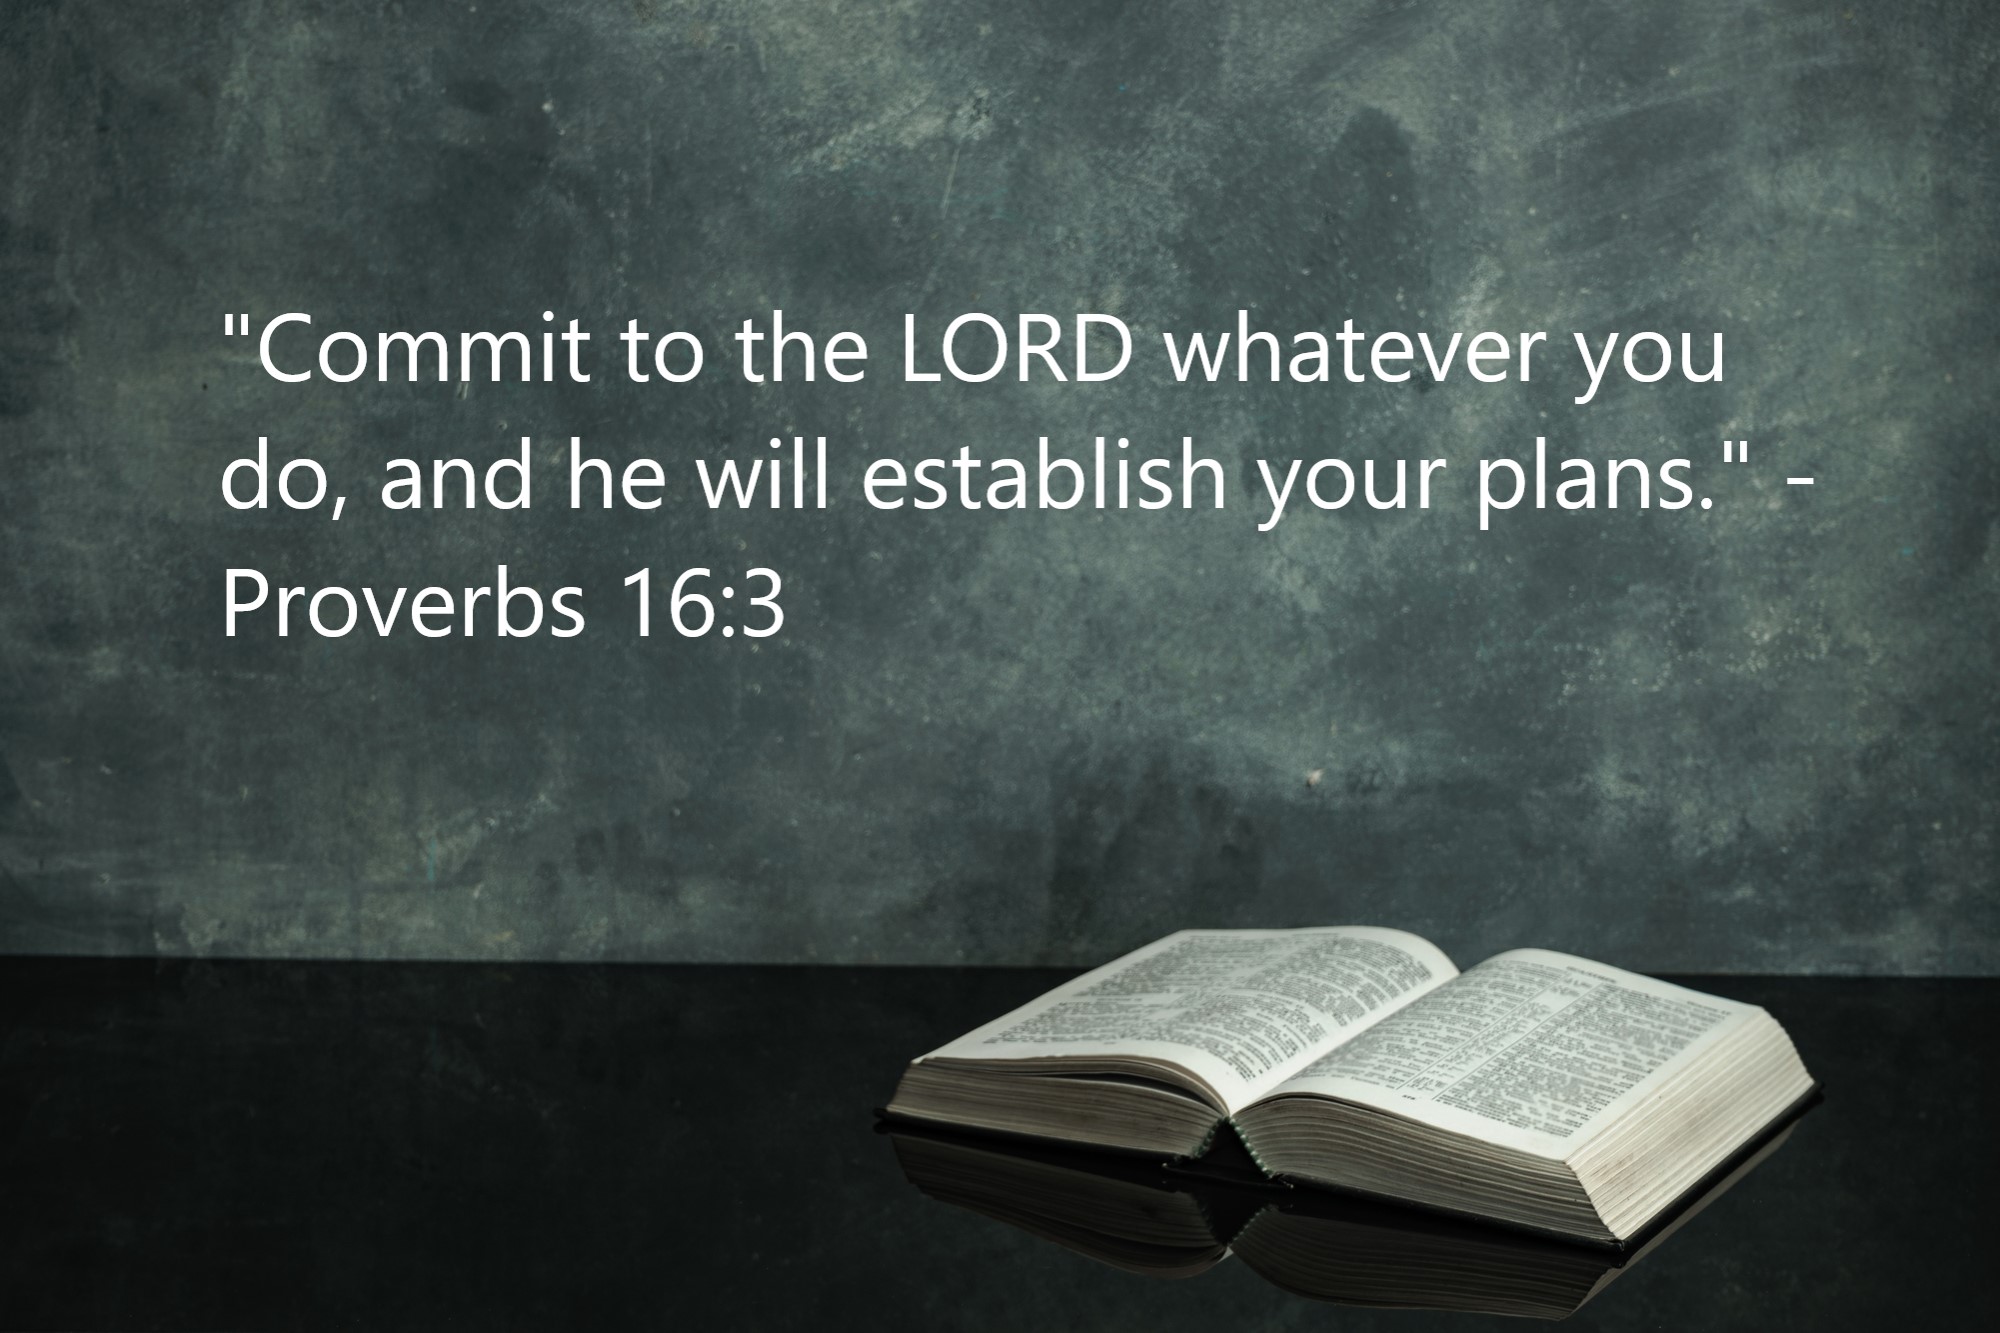 "Commit to the LORD whatever you do, and he will establish your plans." - Proverbs 16:3 